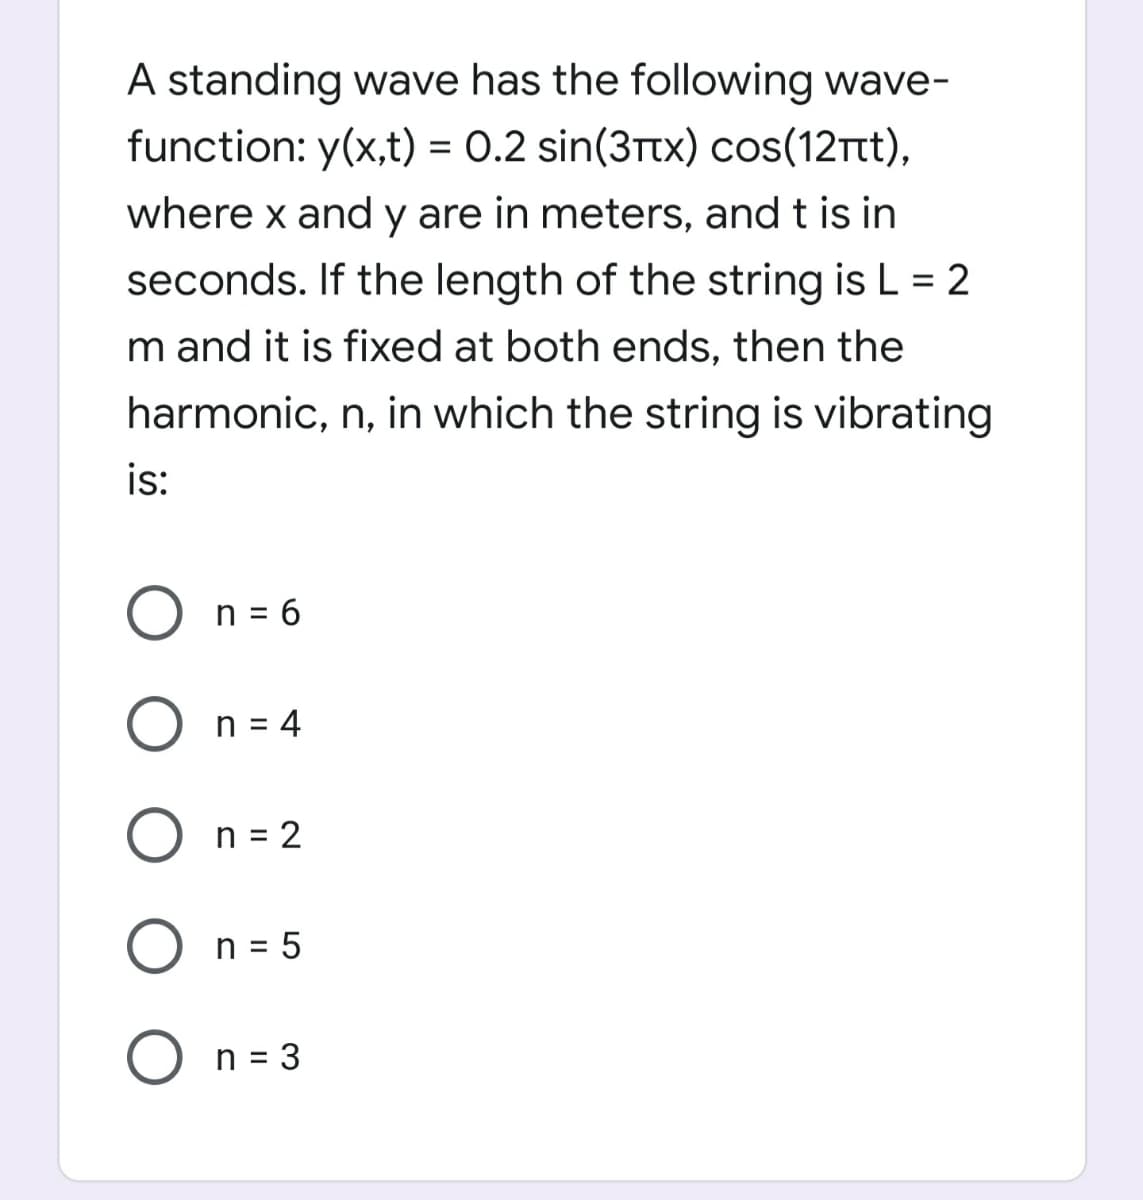 A standing wave has the following wave-
function: y(x,t) = 0.2 sin(3Ttx) cos(12rt),
where x and y are in meters, and t is in
seconds. If the length of the string is L = 2
m and it is fixed at both ends, then the
harmonic, n, in which the string is vibrating
is:
O n = 6
n = 4
O n = 2
O n = 5
O n = 3
